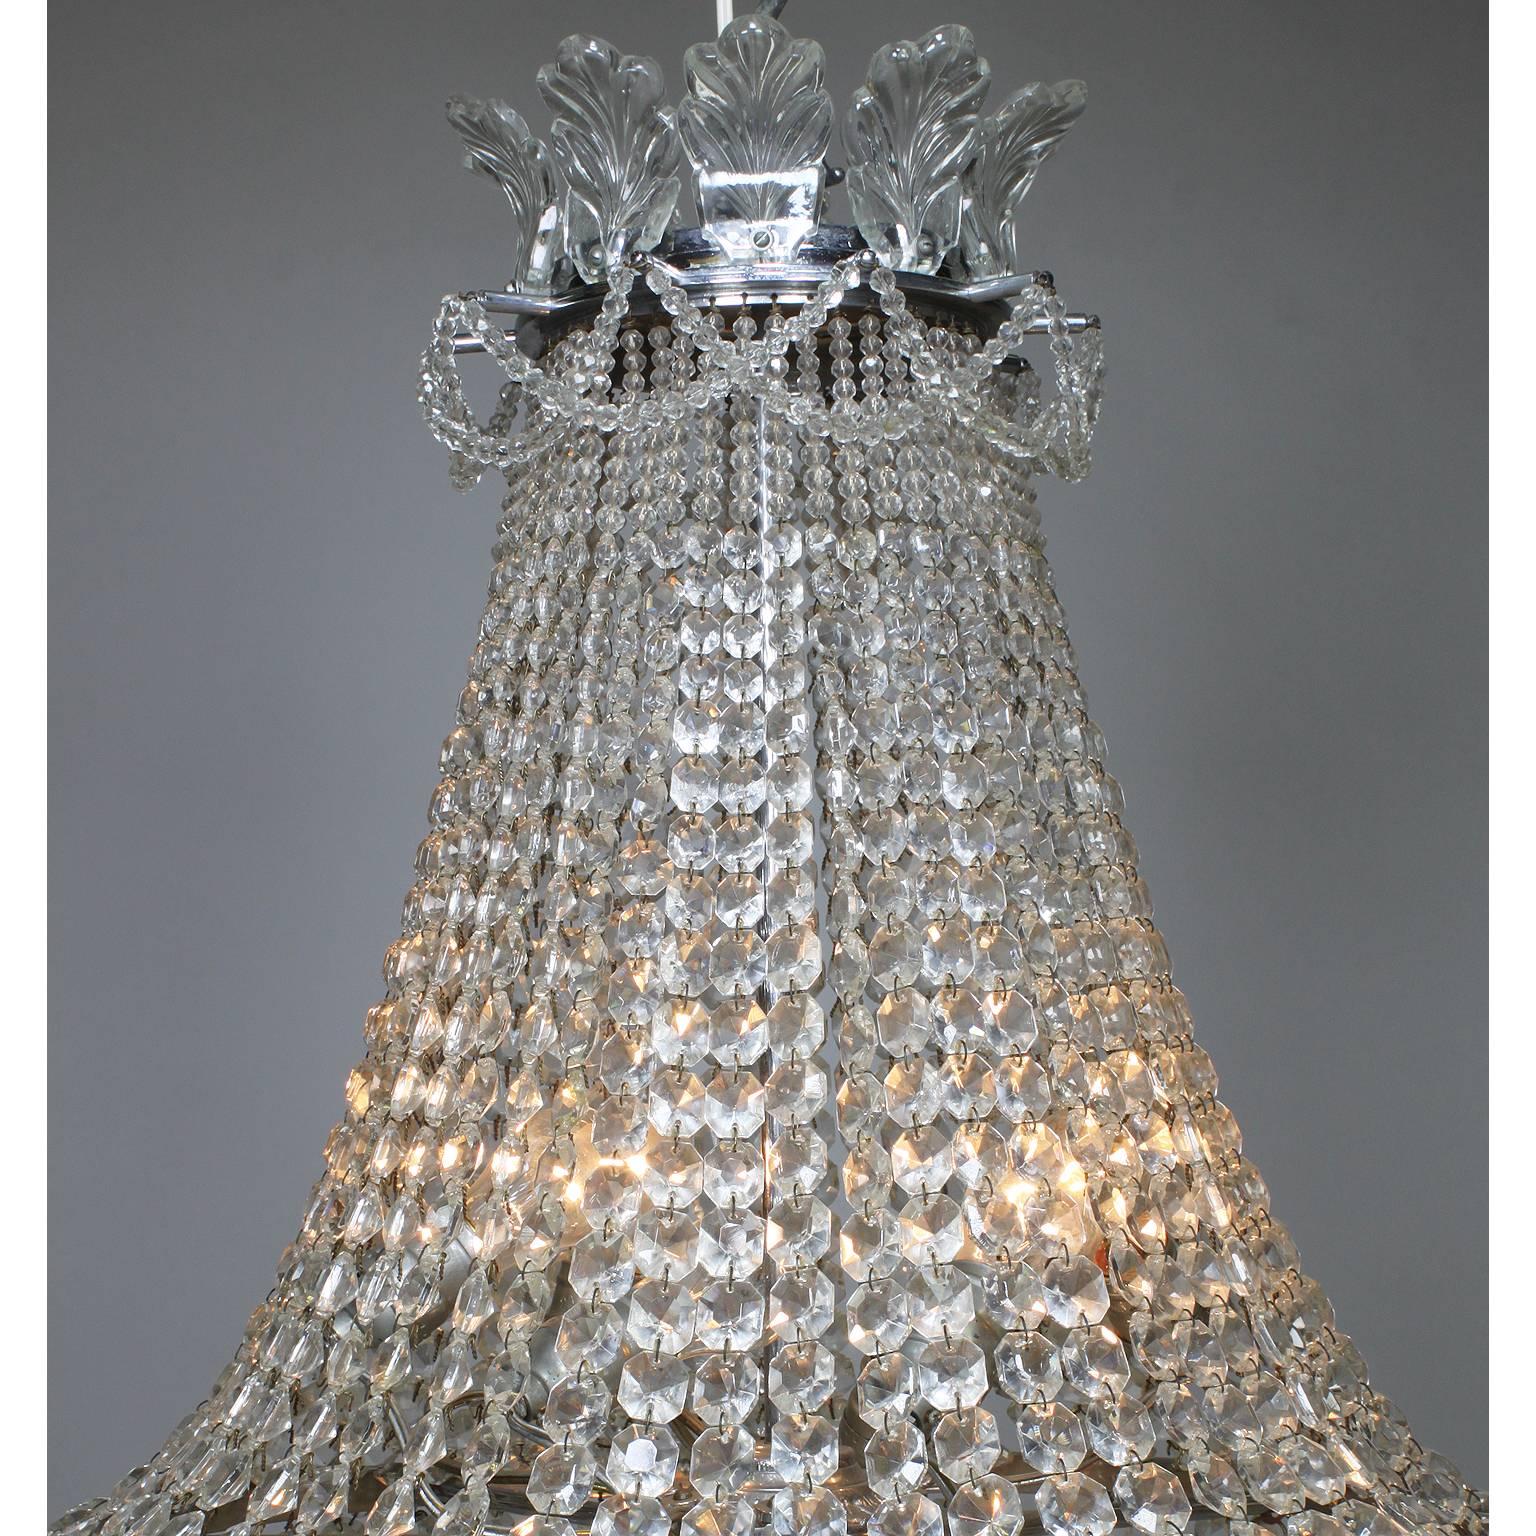 A very fine French Belle Époque 19th-20th century cut-glass cascade and silver plated bronze ten-light chandelier, attributed to Baccarat, Paris, circa 1900.

Measures: Height 35 1/2 inches (90.2 cm)
Width 23 1/2 inches (59.7 cm)